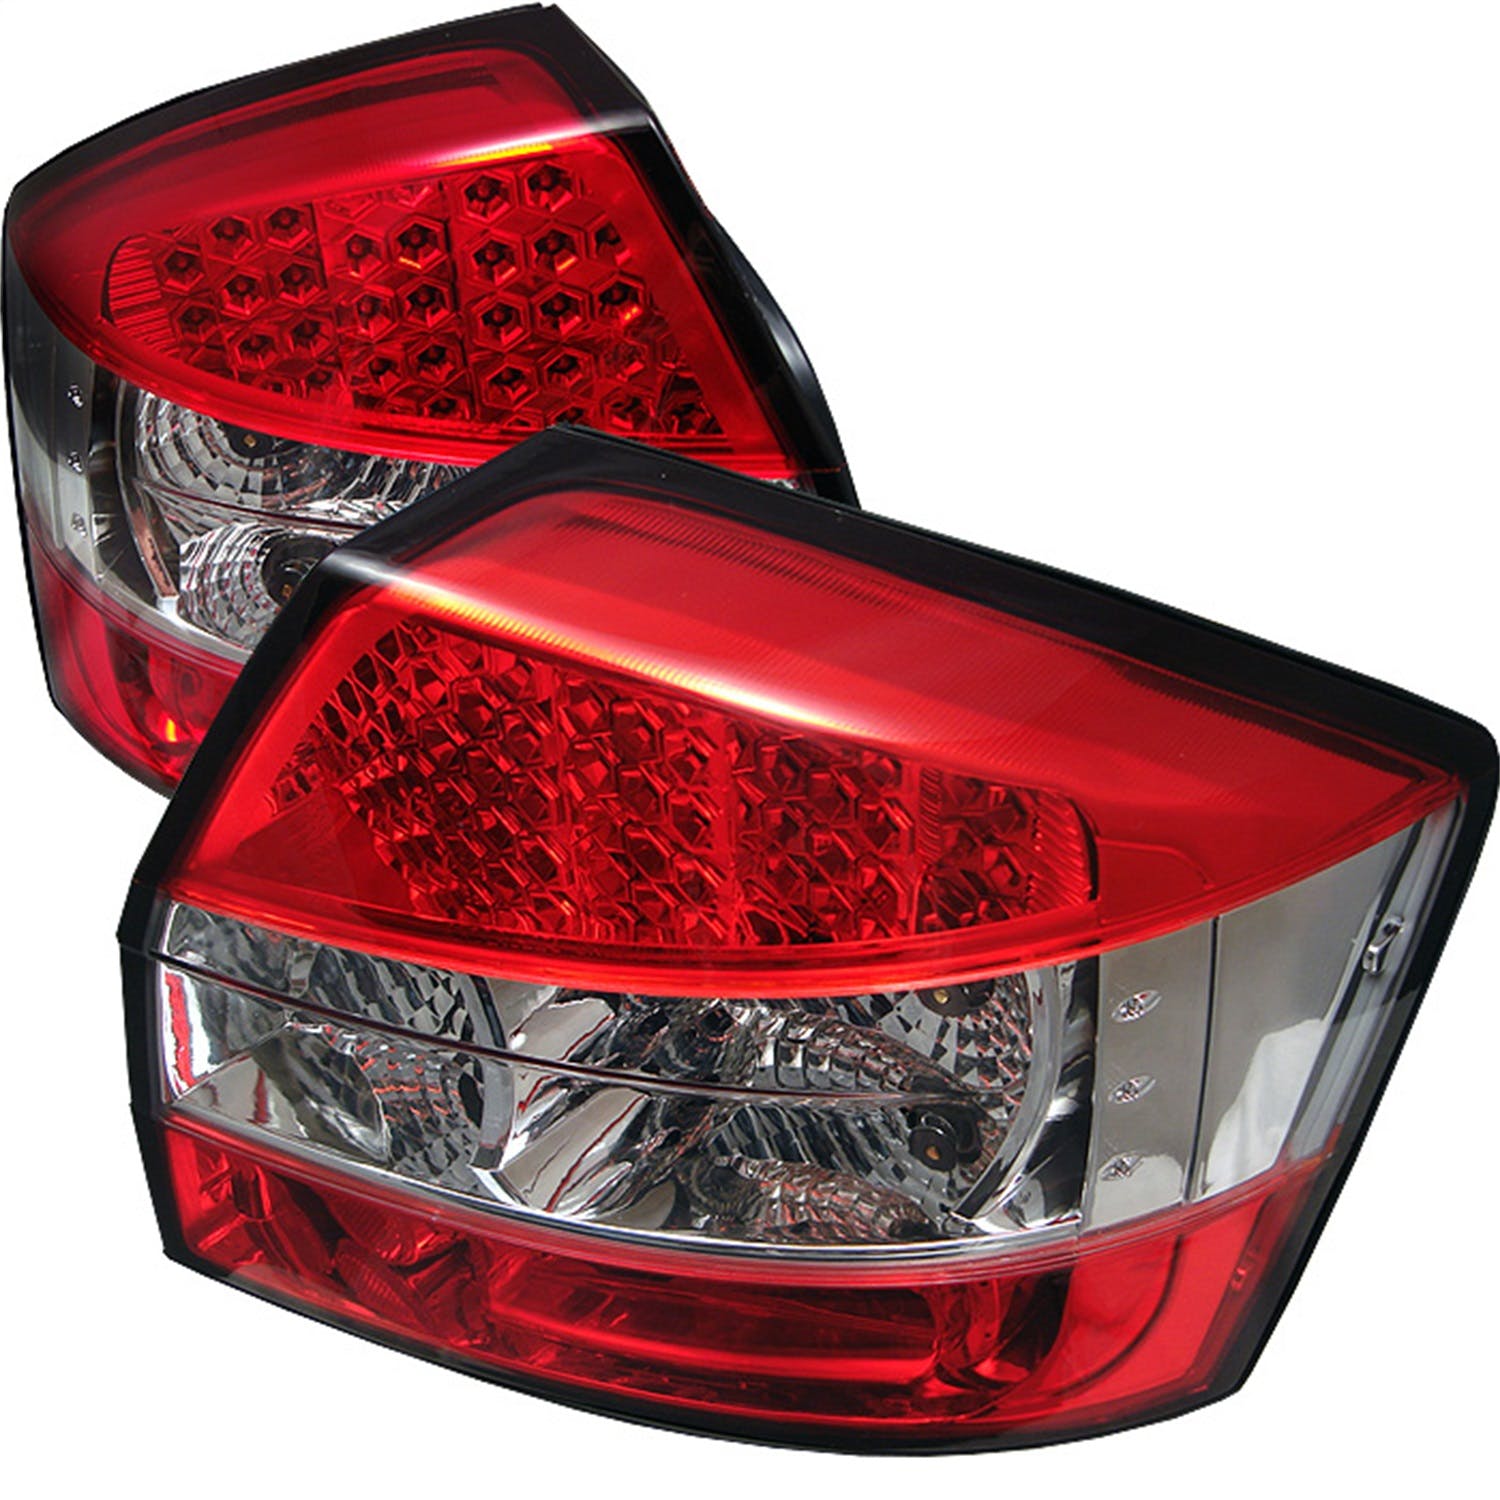 Spyder Auto 5000040 (Spyder) Audi A4 02-05 (Does not fit covertible or wagon models) LED Tail Lights